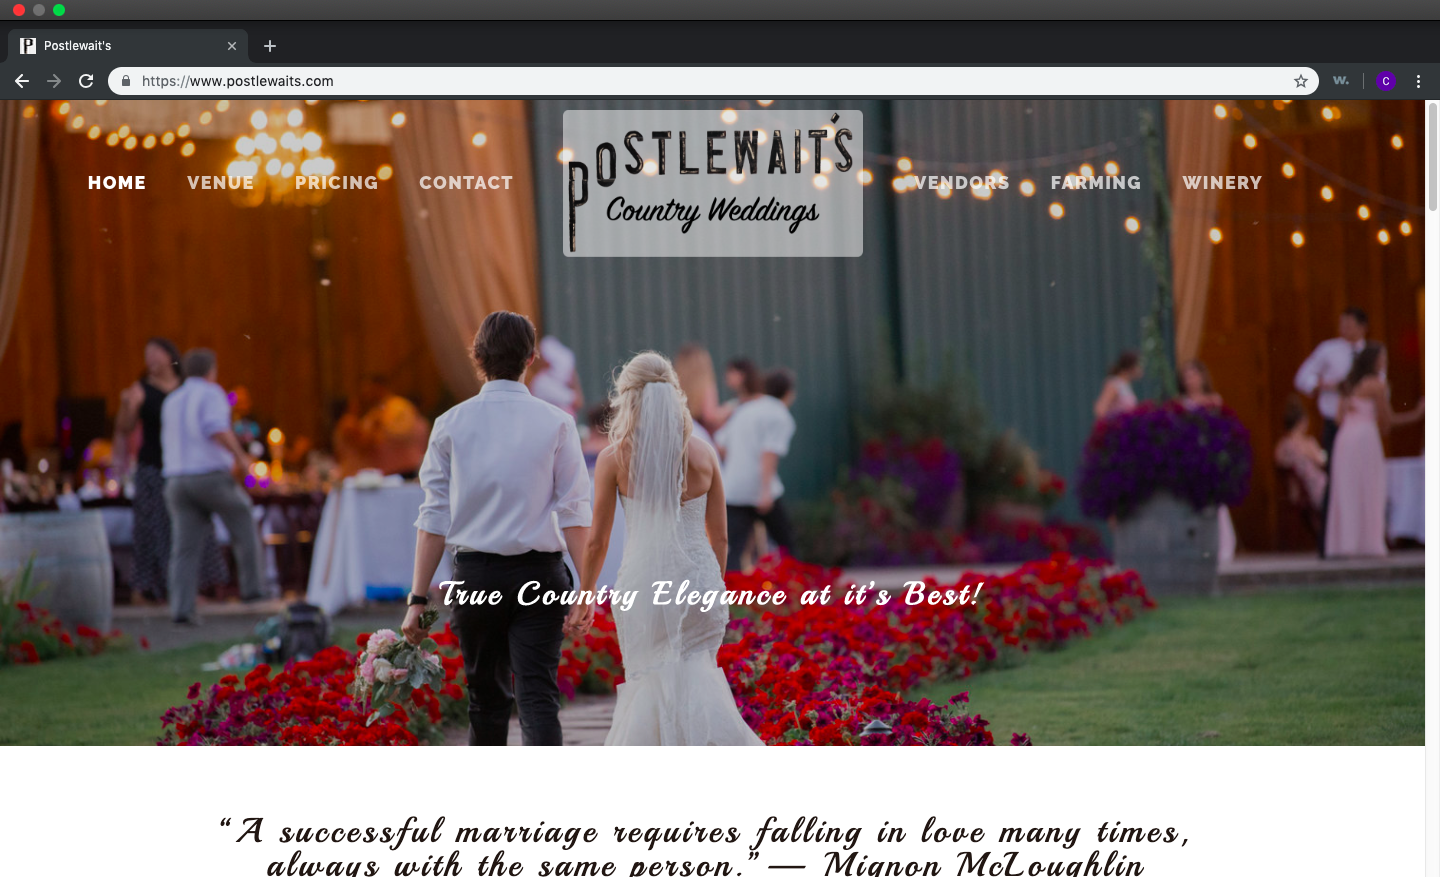 Postlewait's Weddings and Events